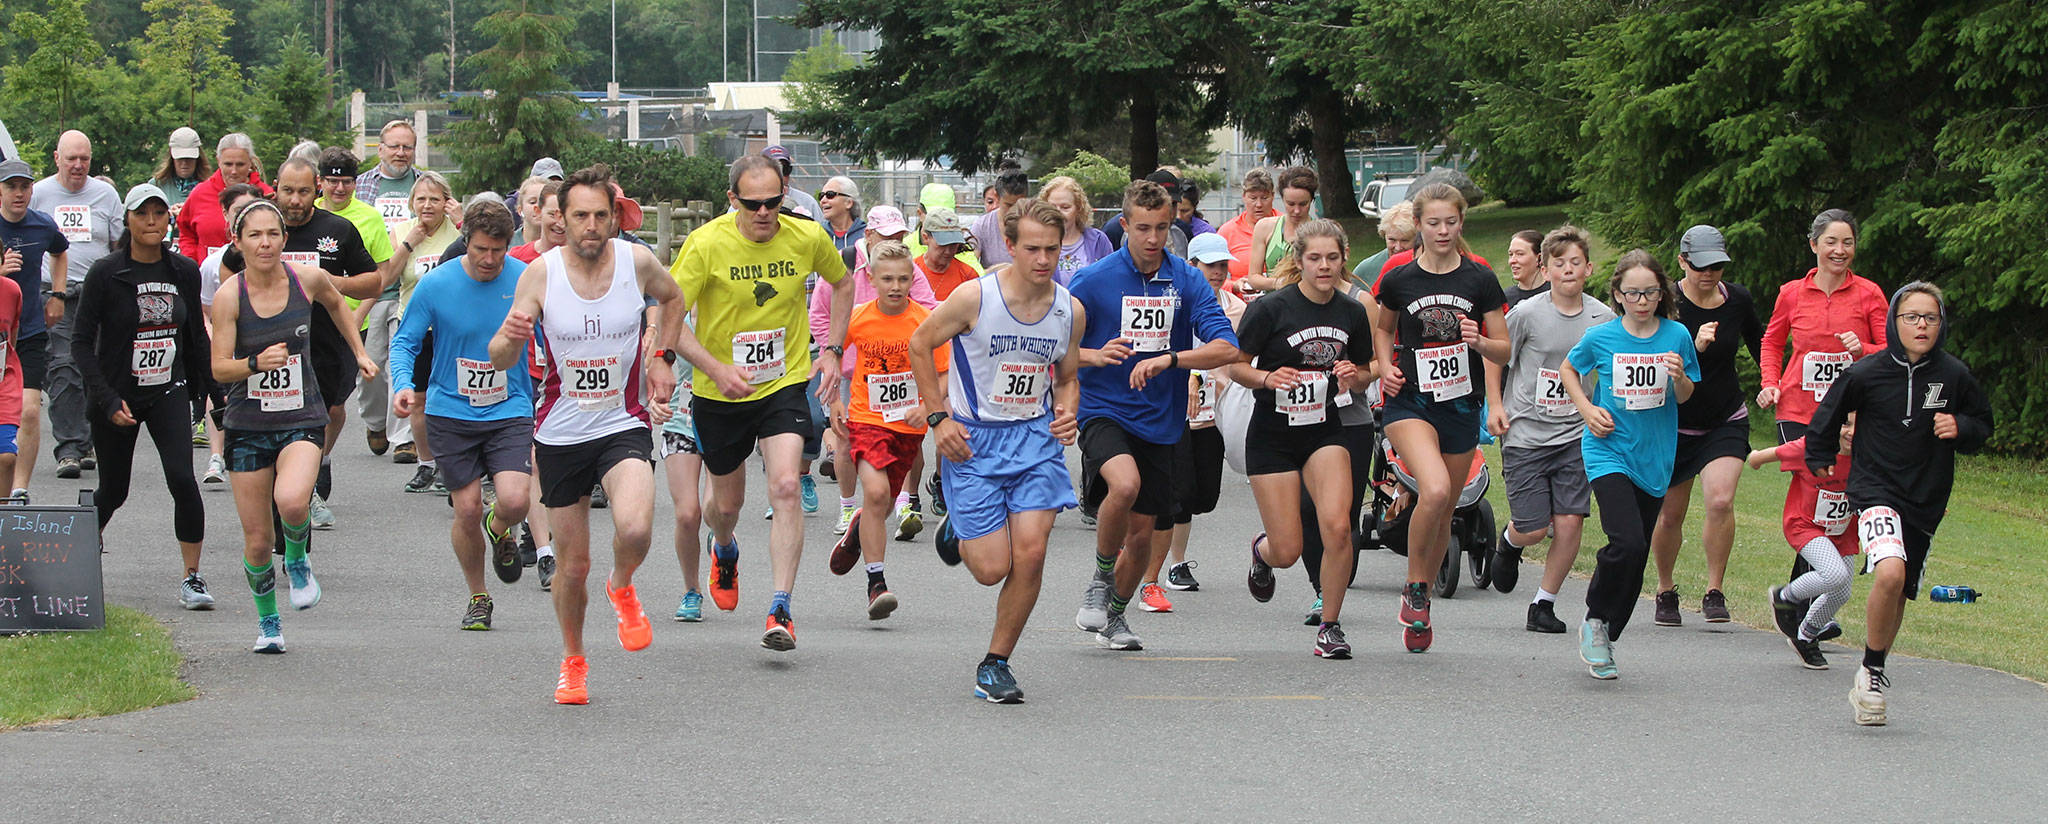 Runners take off from the start line in Saturday’s 22nd annual Chum Run.(Photo by Jim Waller/South Whidbey Record)